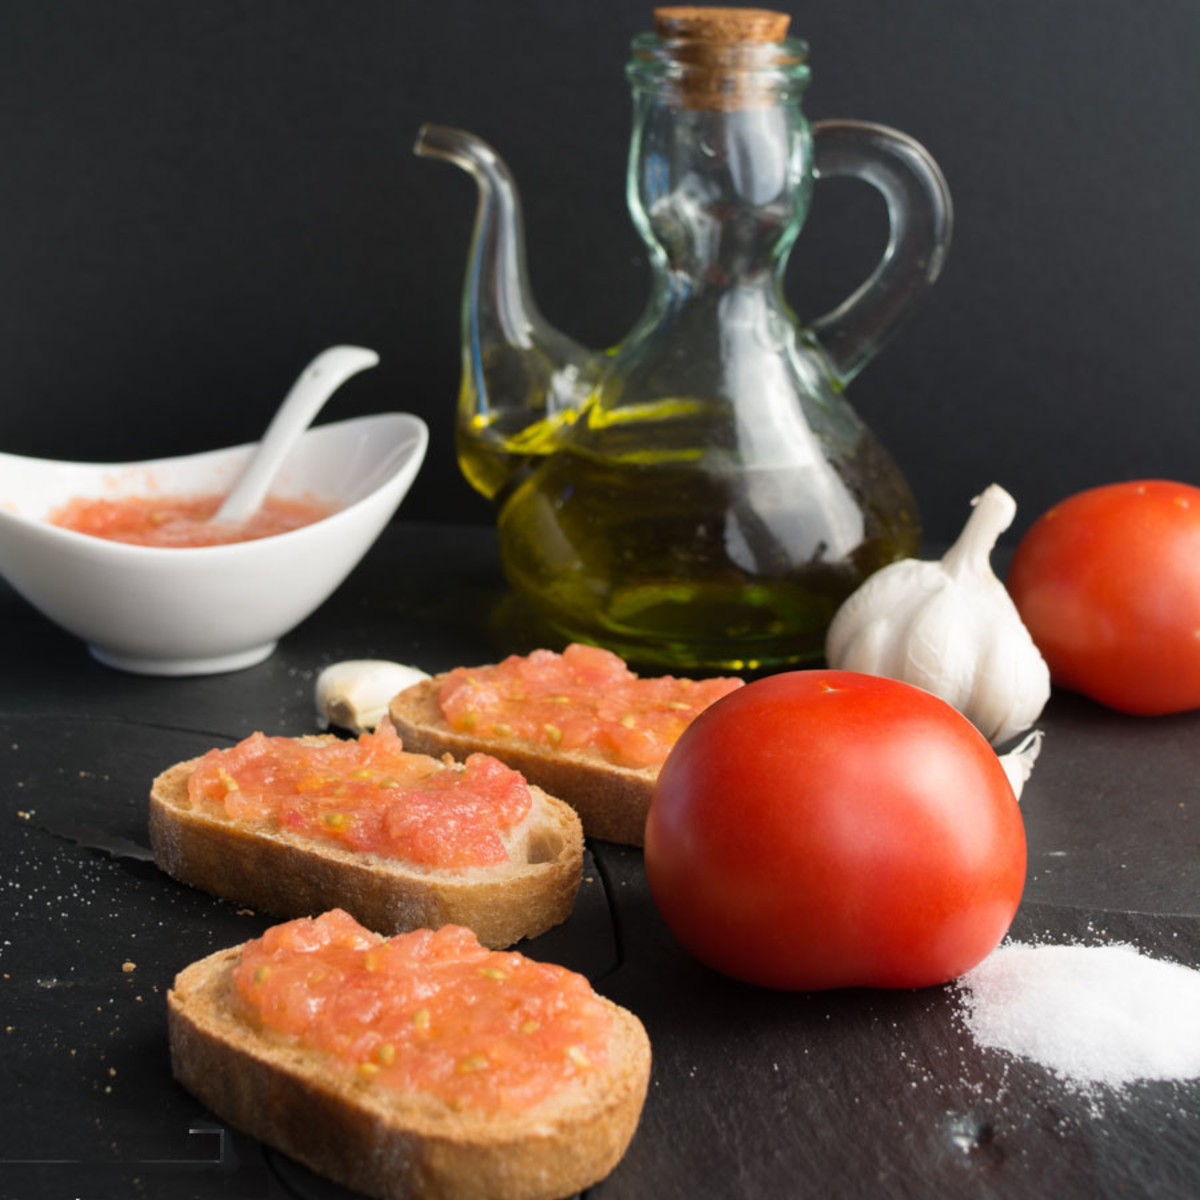 Traditional Spanish breakfast: a slice of bread rubbed with a clove of raw garlic and squashed tomatoes on top.